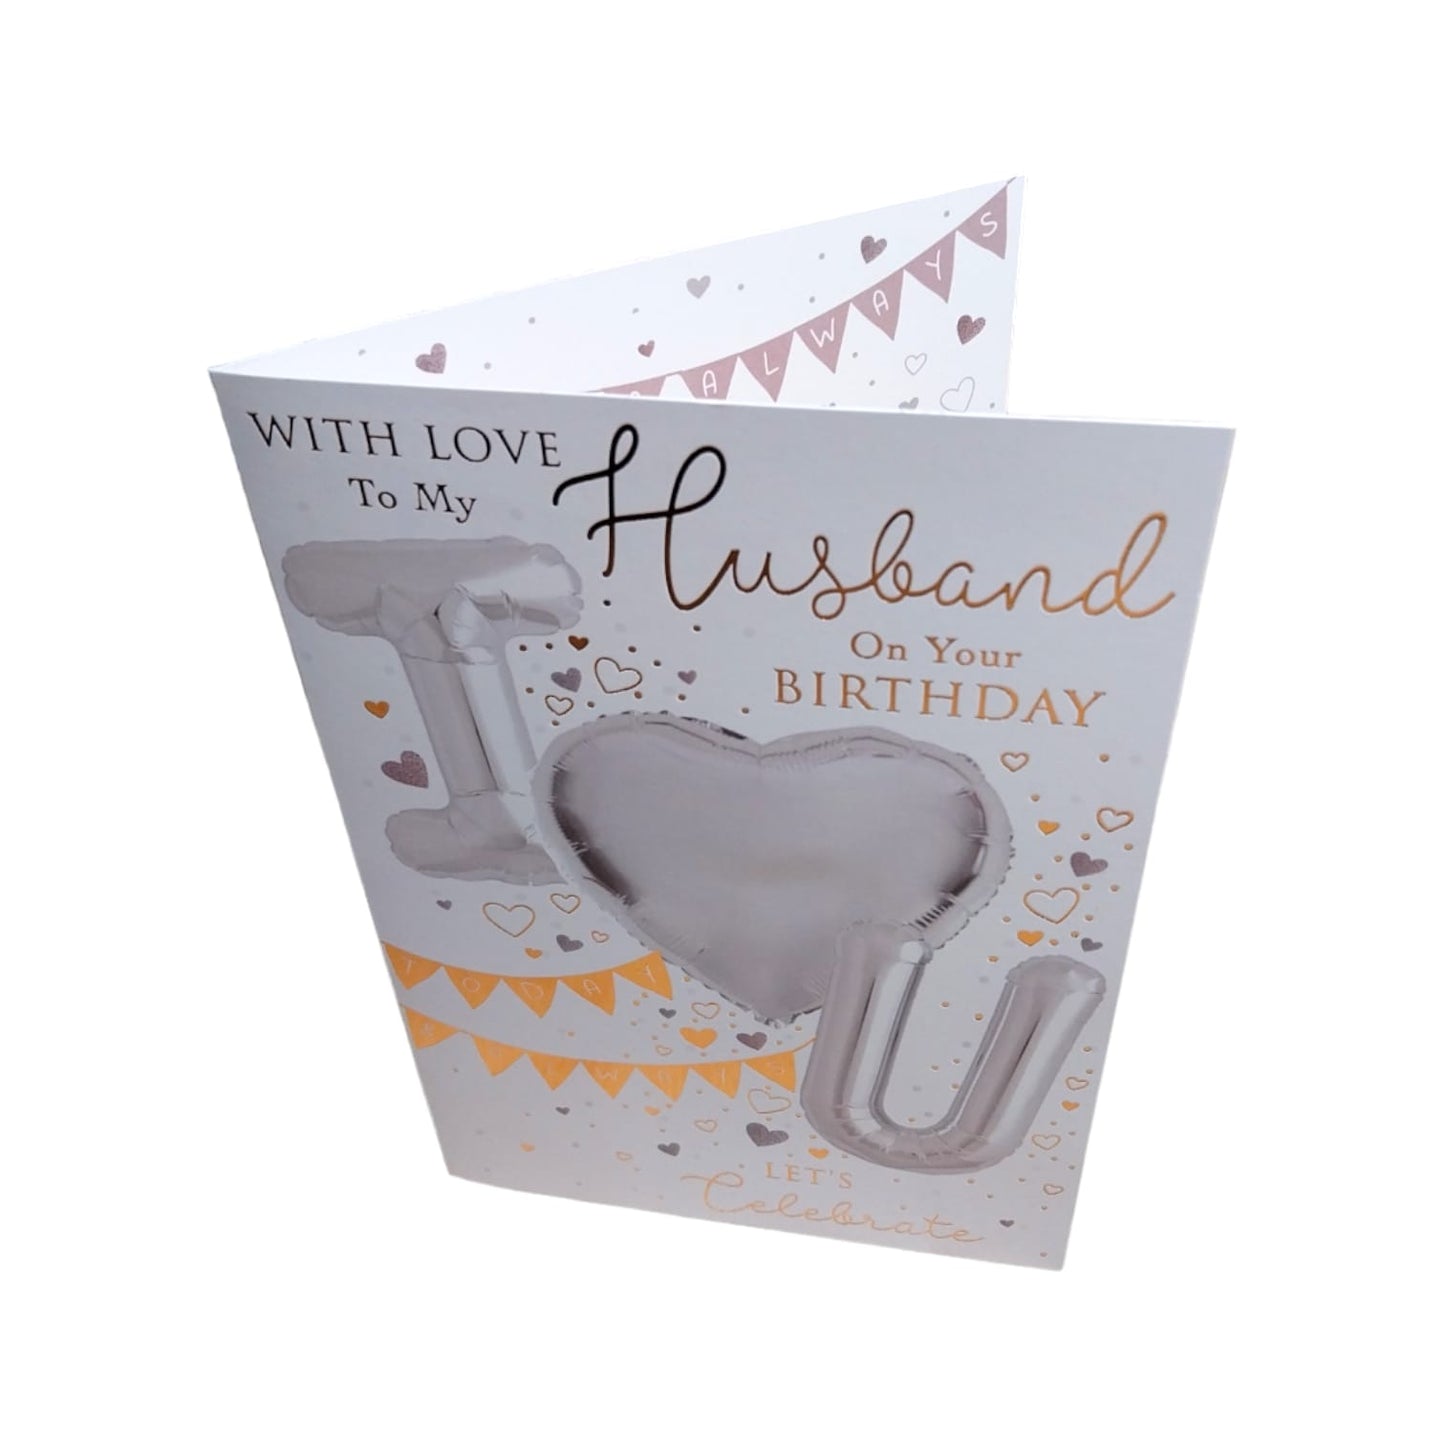 With Love to my Husband on your Birthday Balloon Boutique Greeting Card